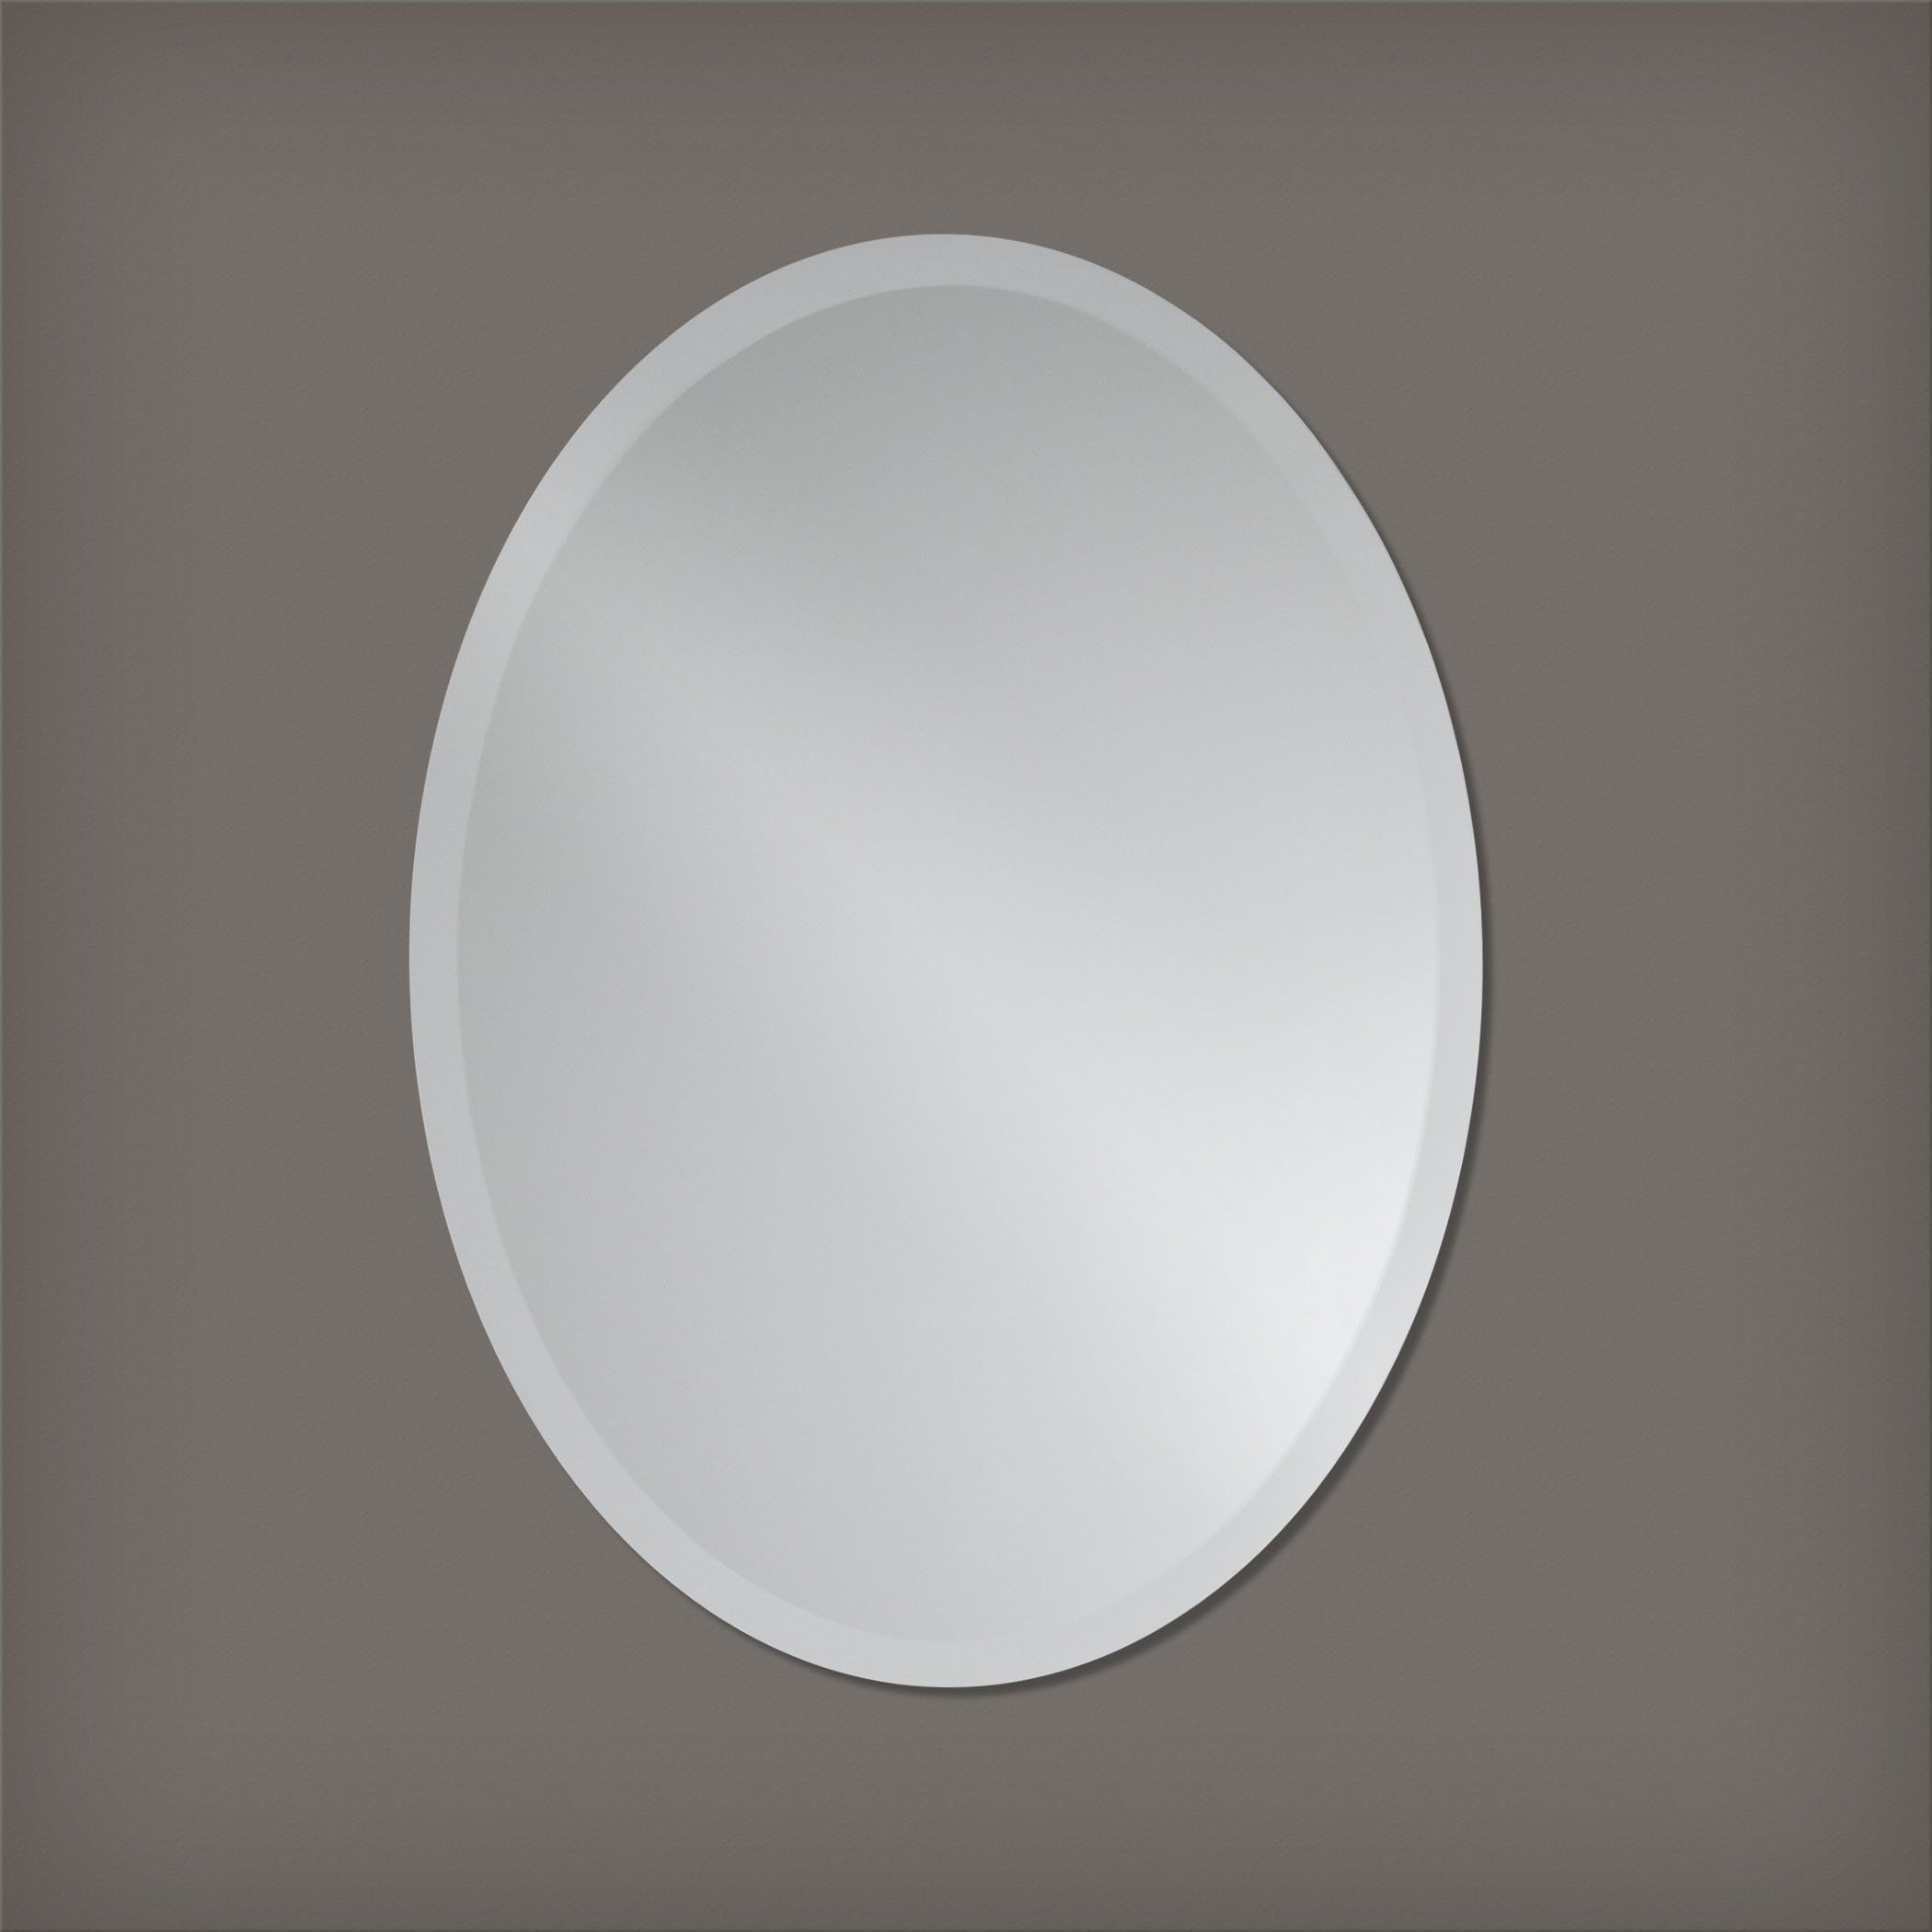 Small Frameless Beveled Oval Wall Mirror Bathroom Vanity Bedroom Mirror Throughout Oval Beveled Frameless Wall Mirrors (View 1 of 15)